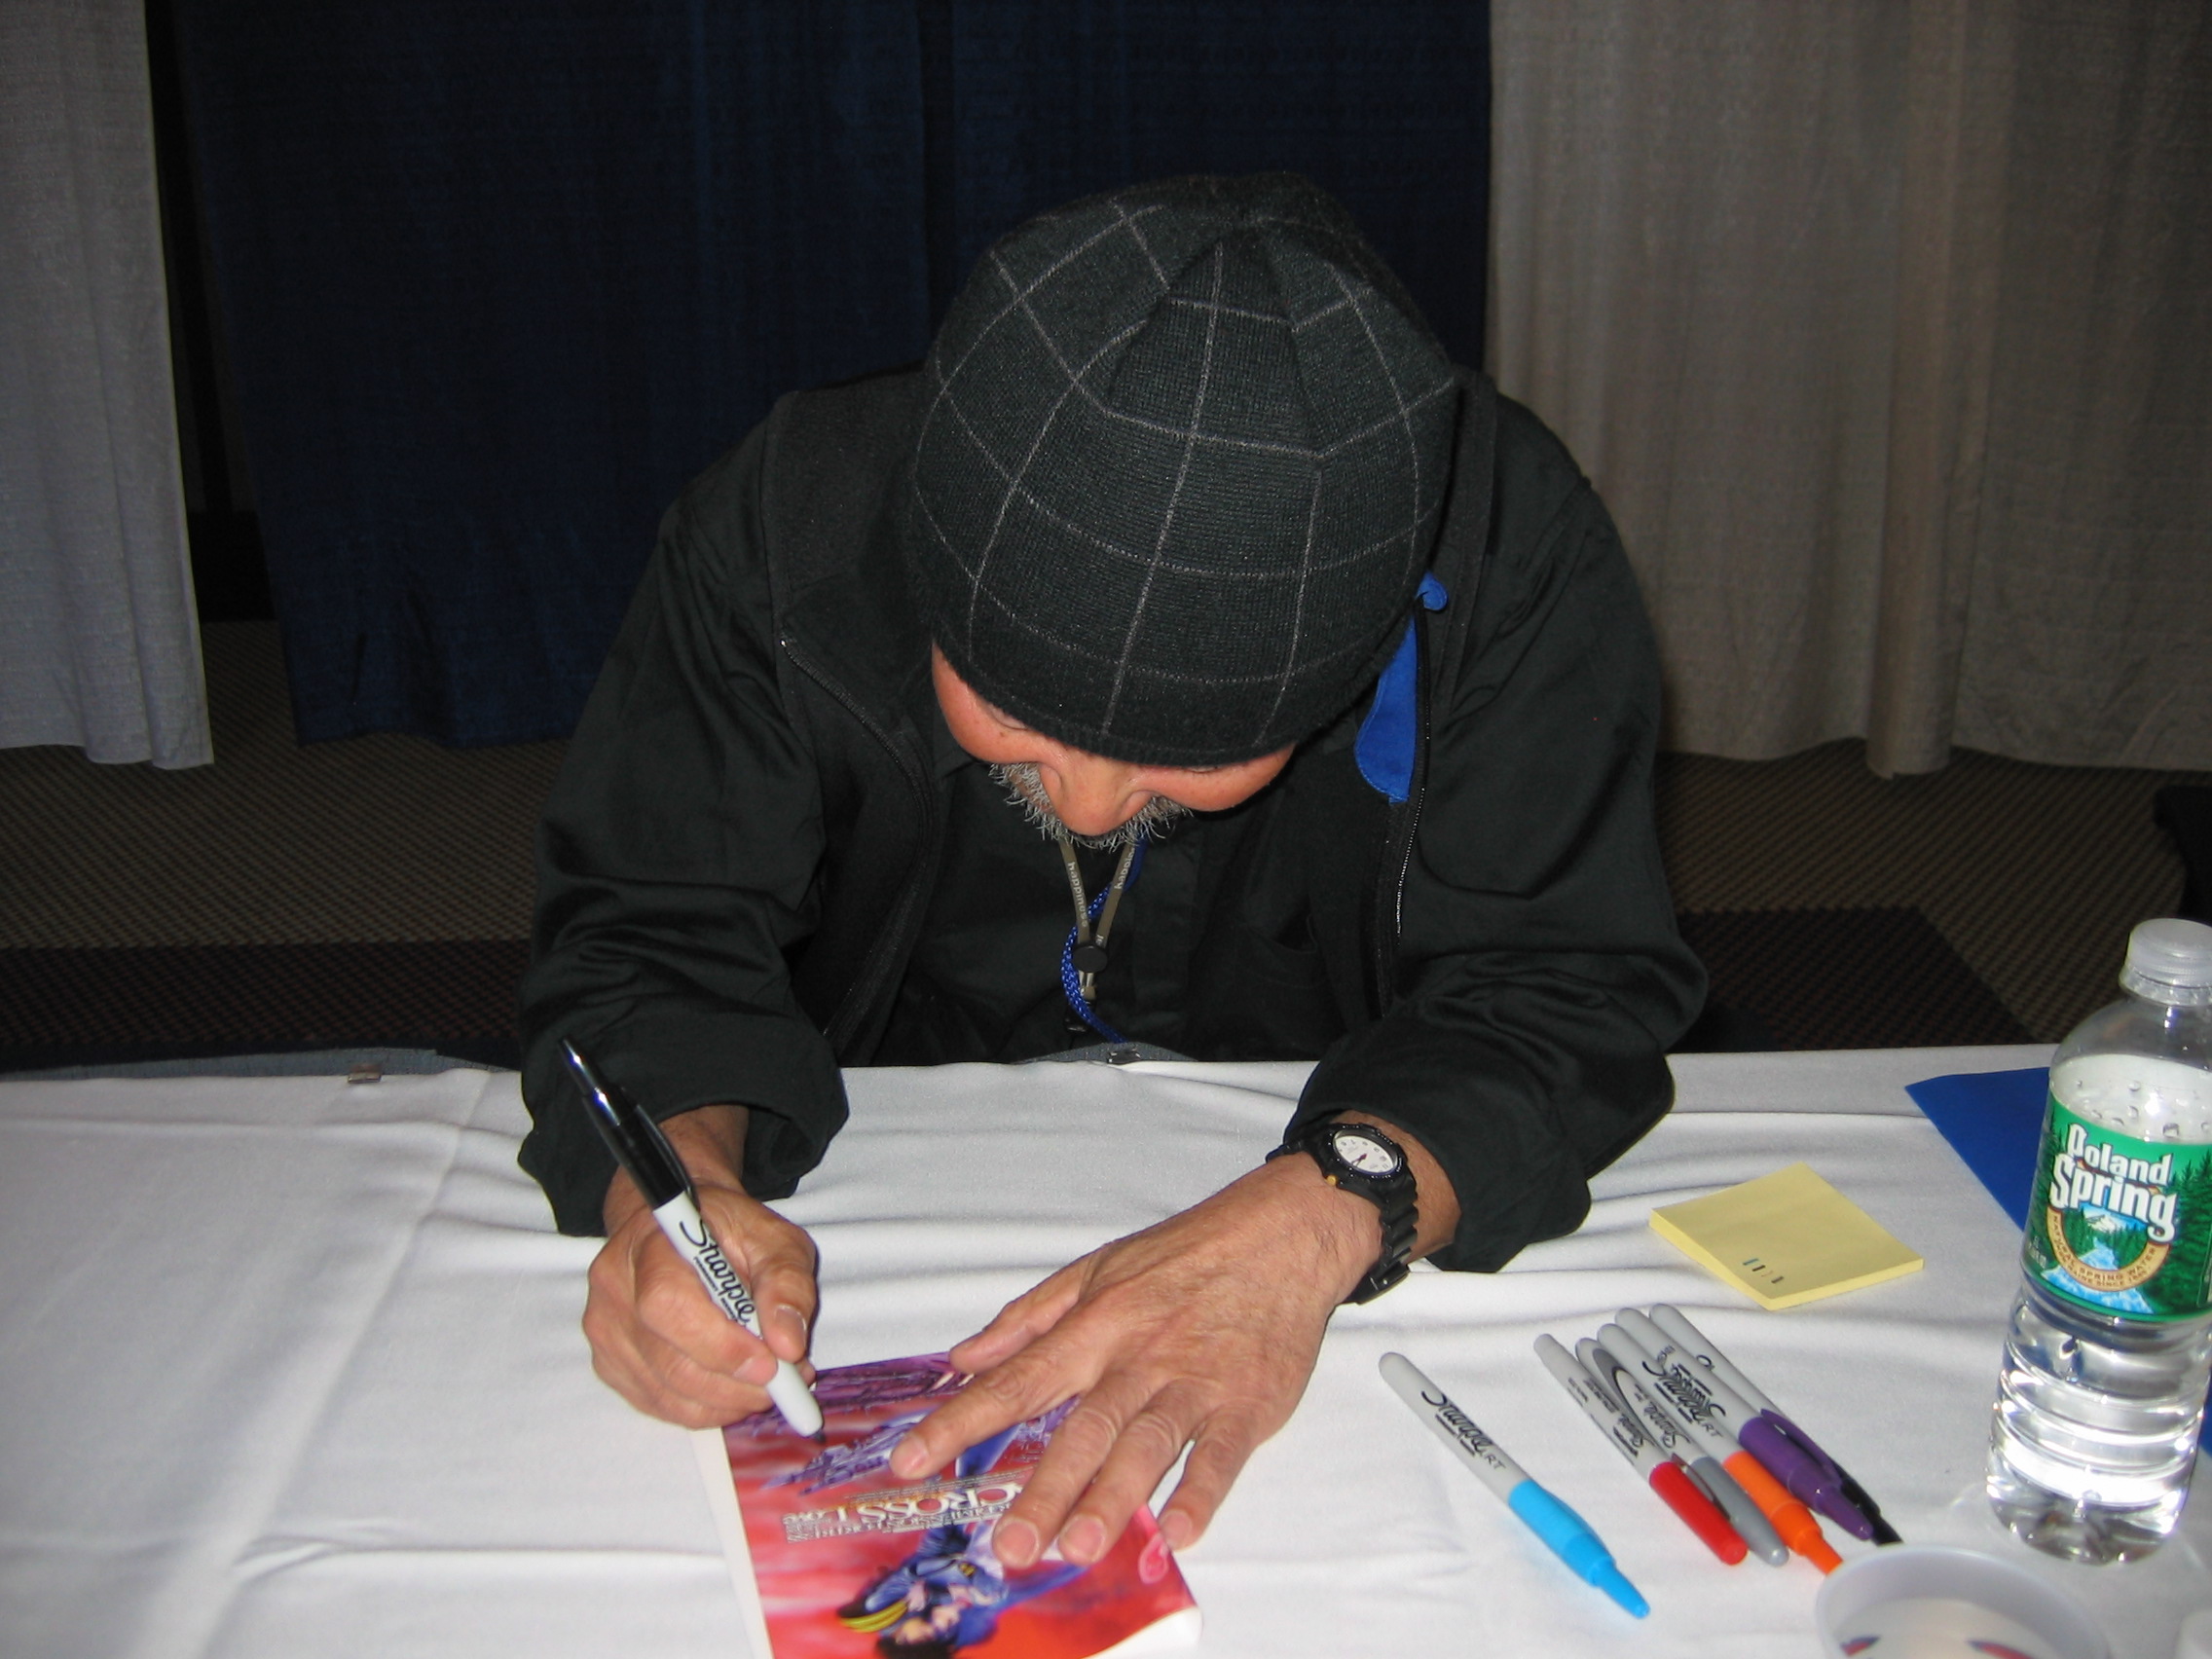 Iwata Hiroshi signs the Japanese R2 DVD cover for Macross: Do You Remember Love?